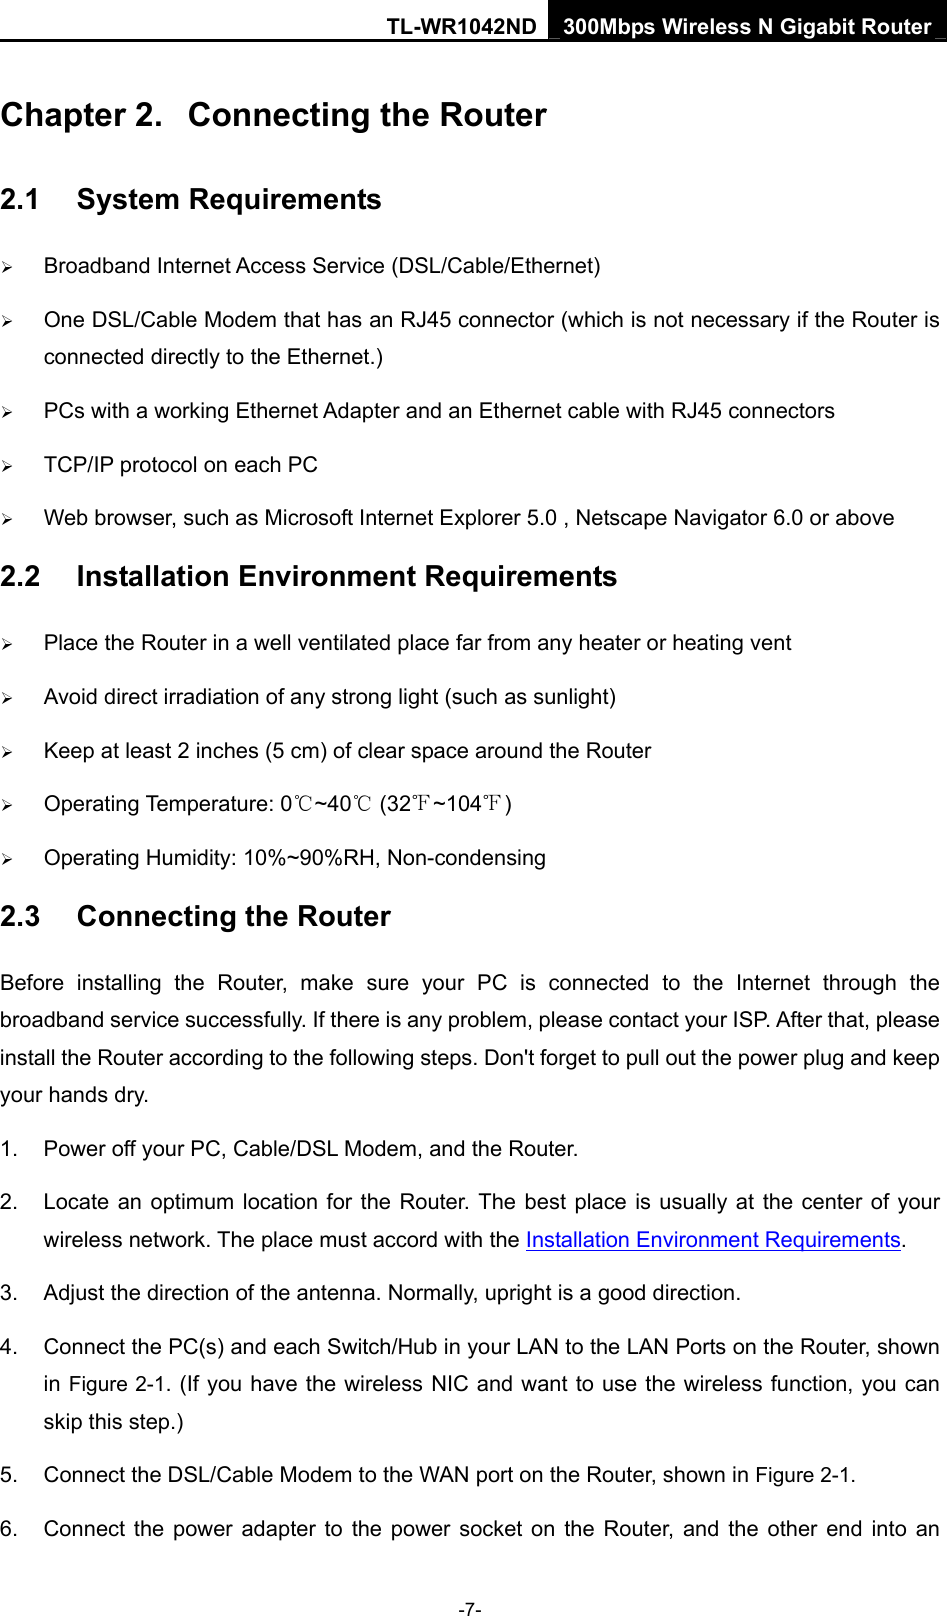 TL-WR1042ND 300Mbps Wireless N Gigabit Router -7- Chapter 2.  Connecting the Router 2.1  System Requirements ¾ Broadband Internet Access Service (DSL/Cable/Ethernet) ¾ One DSL/Cable Modem that has an RJ45 connector (which is not necessary if the Router is connected directly to the Ethernet.) ¾ PCs with a working Ethernet Adapter and an Ethernet cable with RJ45 connectors   ¾ TCP/IP protocol on each PC ¾ Web browser, such as Microsoft Internet Explorer 5.0 , Netscape Navigator 6.0 or above 2.2  Installation Environment Requirements ¾ Place the Router in a well ventilated place far from any heater or heating vent   ¾ Avoid direct irradiation of any strong light (such as sunlight) ¾ Keep at least 2 inches (5 cm) of clear space around the Router ¾ Operating Temperature: 0 ~40  (32 ~104 )℃℃℉ ℉ ¾ Operating Humidity: 10%~90%RH, Non-condensing 2.3  Connecting the Router Before installing the Router, make sure your PC is connected to the Internet through the broadband service successfully. If there is any problem, please contact your ISP. After that, please install the Router according to the following steps. Don&apos;t forget to pull out the power plug and keep your hands dry. 1.  Power off your PC, Cable/DSL Modem, and the Router.   2.  Locate an optimum location for the Router. The best place is usually at the center of your wireless network. The place must accord with the Installation Environment Requirements.  3.  Adjust the direction of the antenna. Normally, upright is a good direction. 4.  Connect the PC(s) and each Switch/Hub in your LAN to the LAN Ports on the Router, shown in Figure 2-1. (If you have the wireless NIC and want to use the wireless function, you can skip this step.) 5.  Connect the DSL/Cable Modem to the WAN port on the Router, shown in Figure 2-1. 6.  Connect the power adapter to the power socket on the Router, and the other end into an 